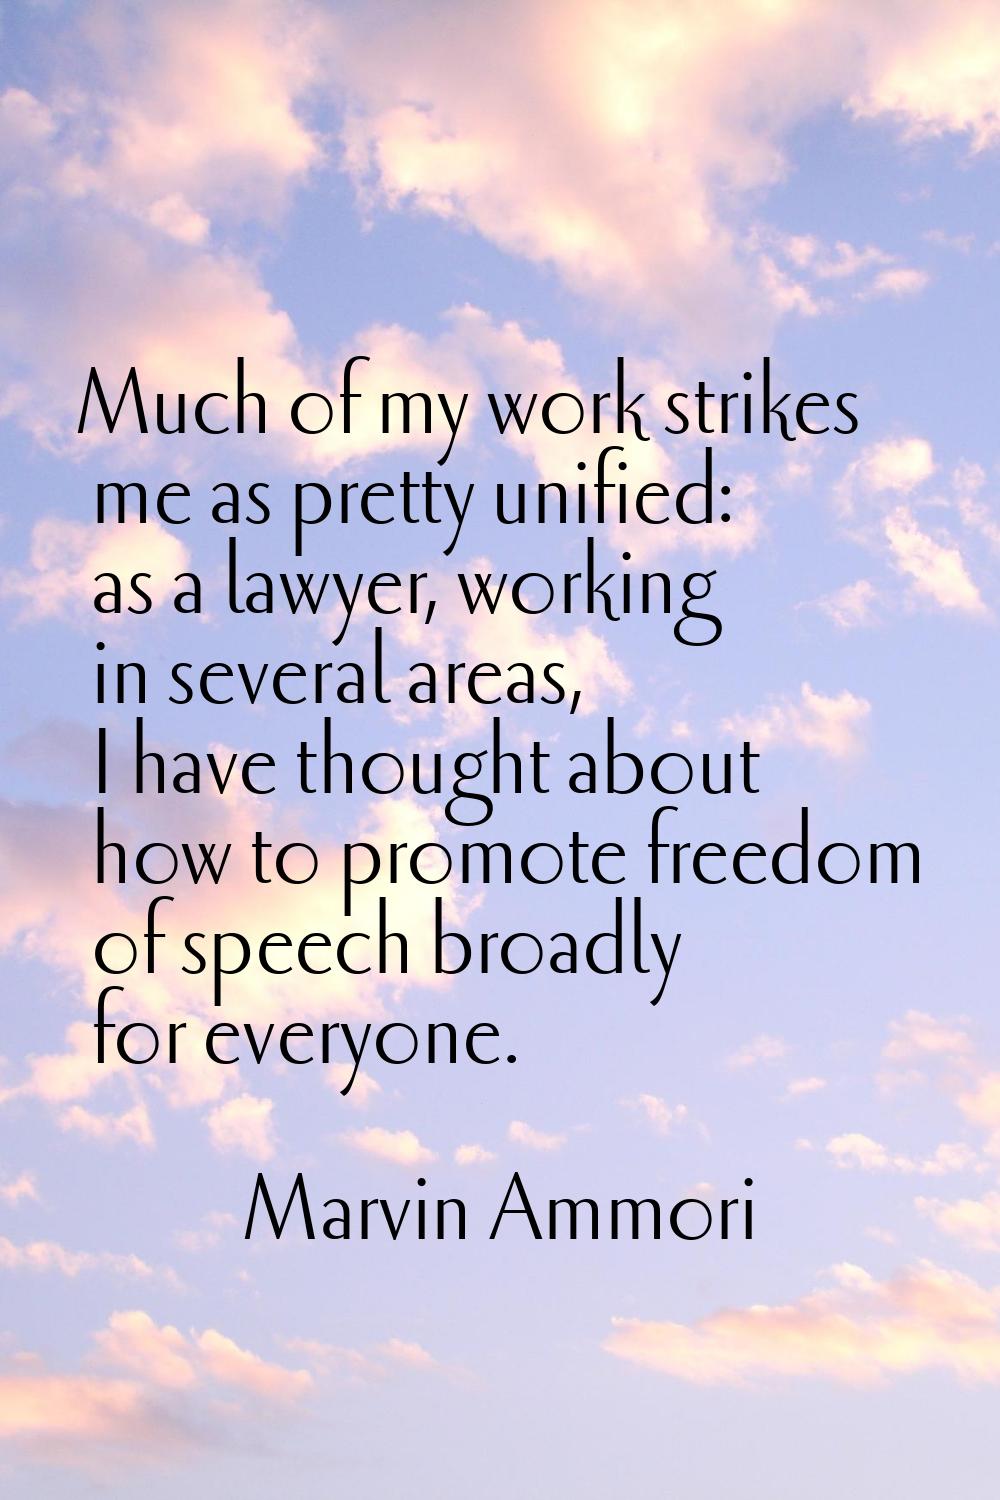 Much of my work strikes me as pretty unified: as a lawyer, working in several areas, I have thought